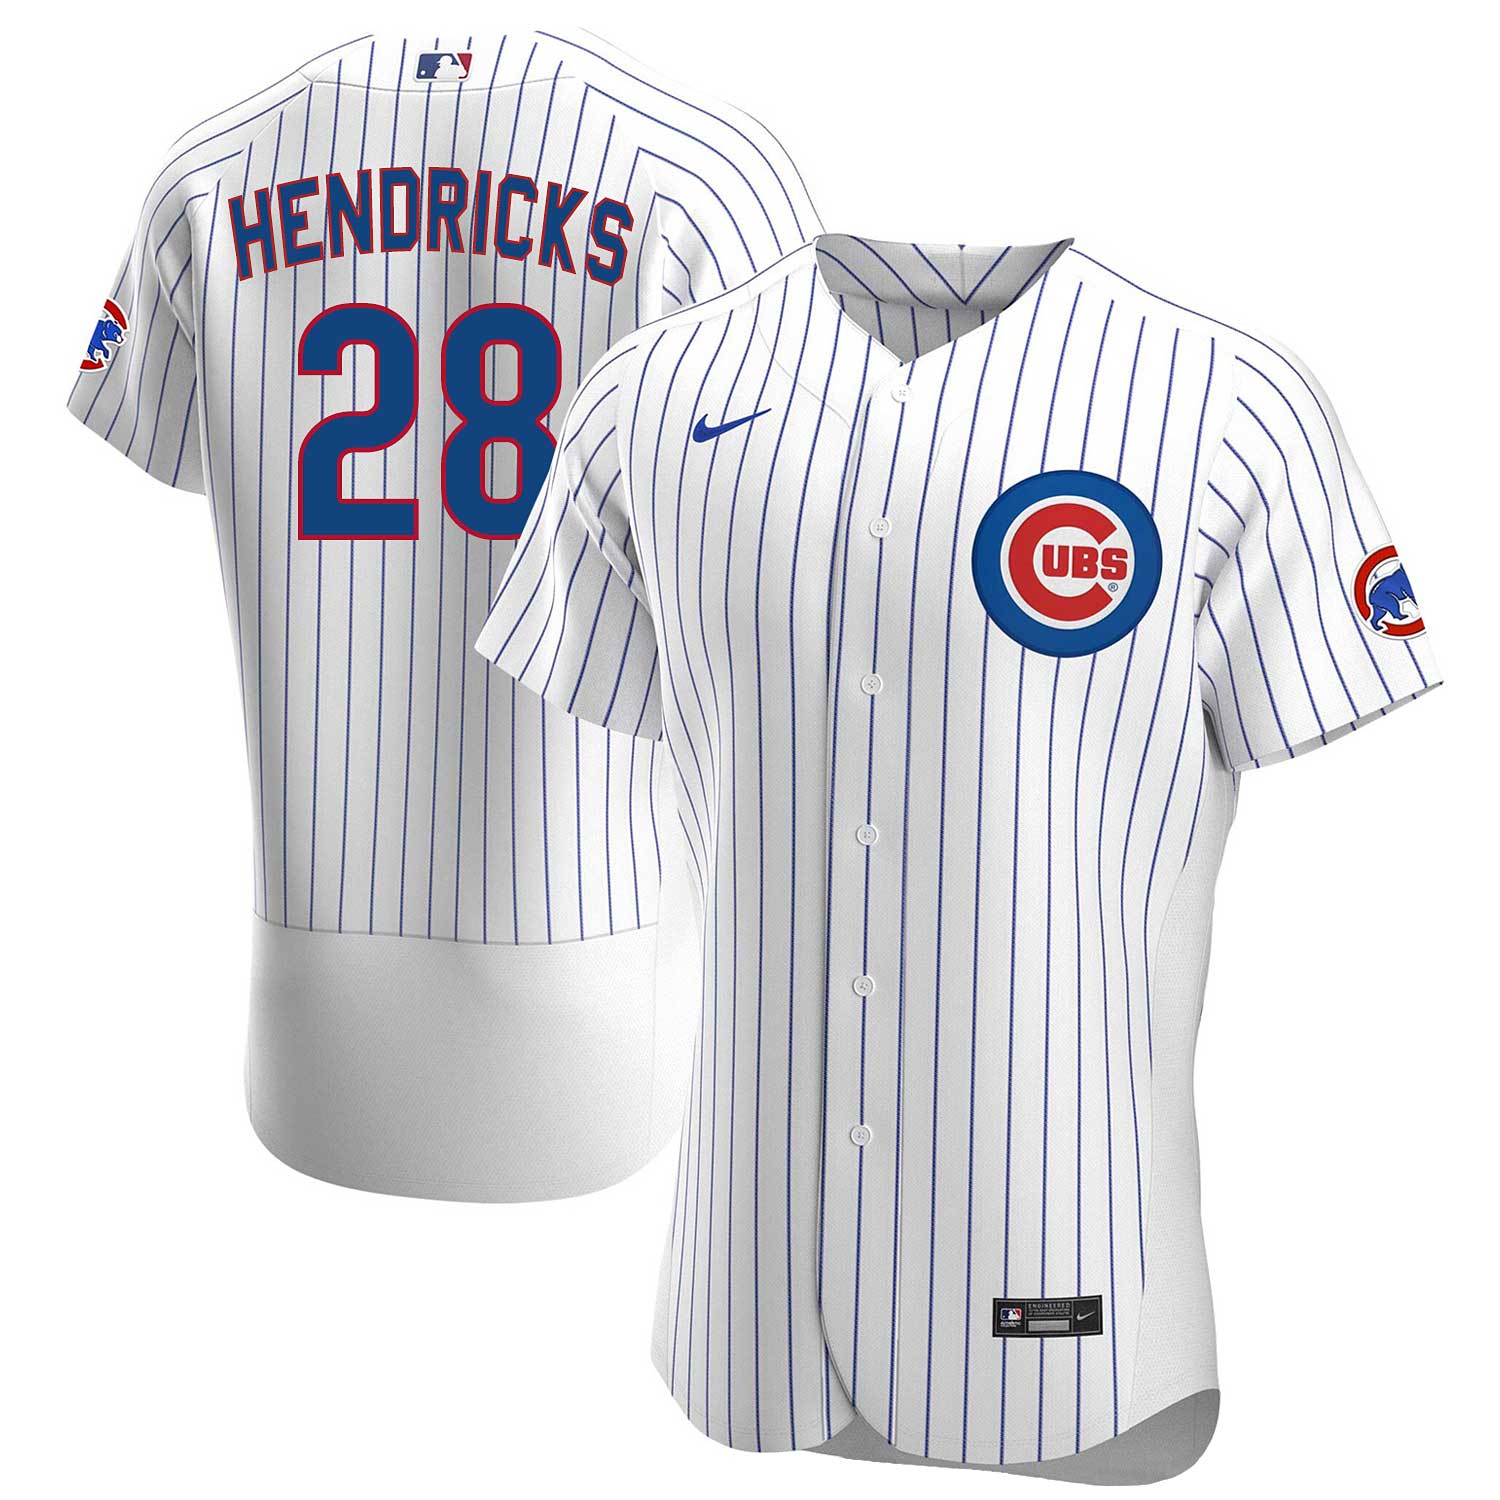 Chicago Cubs Kyle Hendricks Nike Home Authentic Jersey 44 = Medium / Large